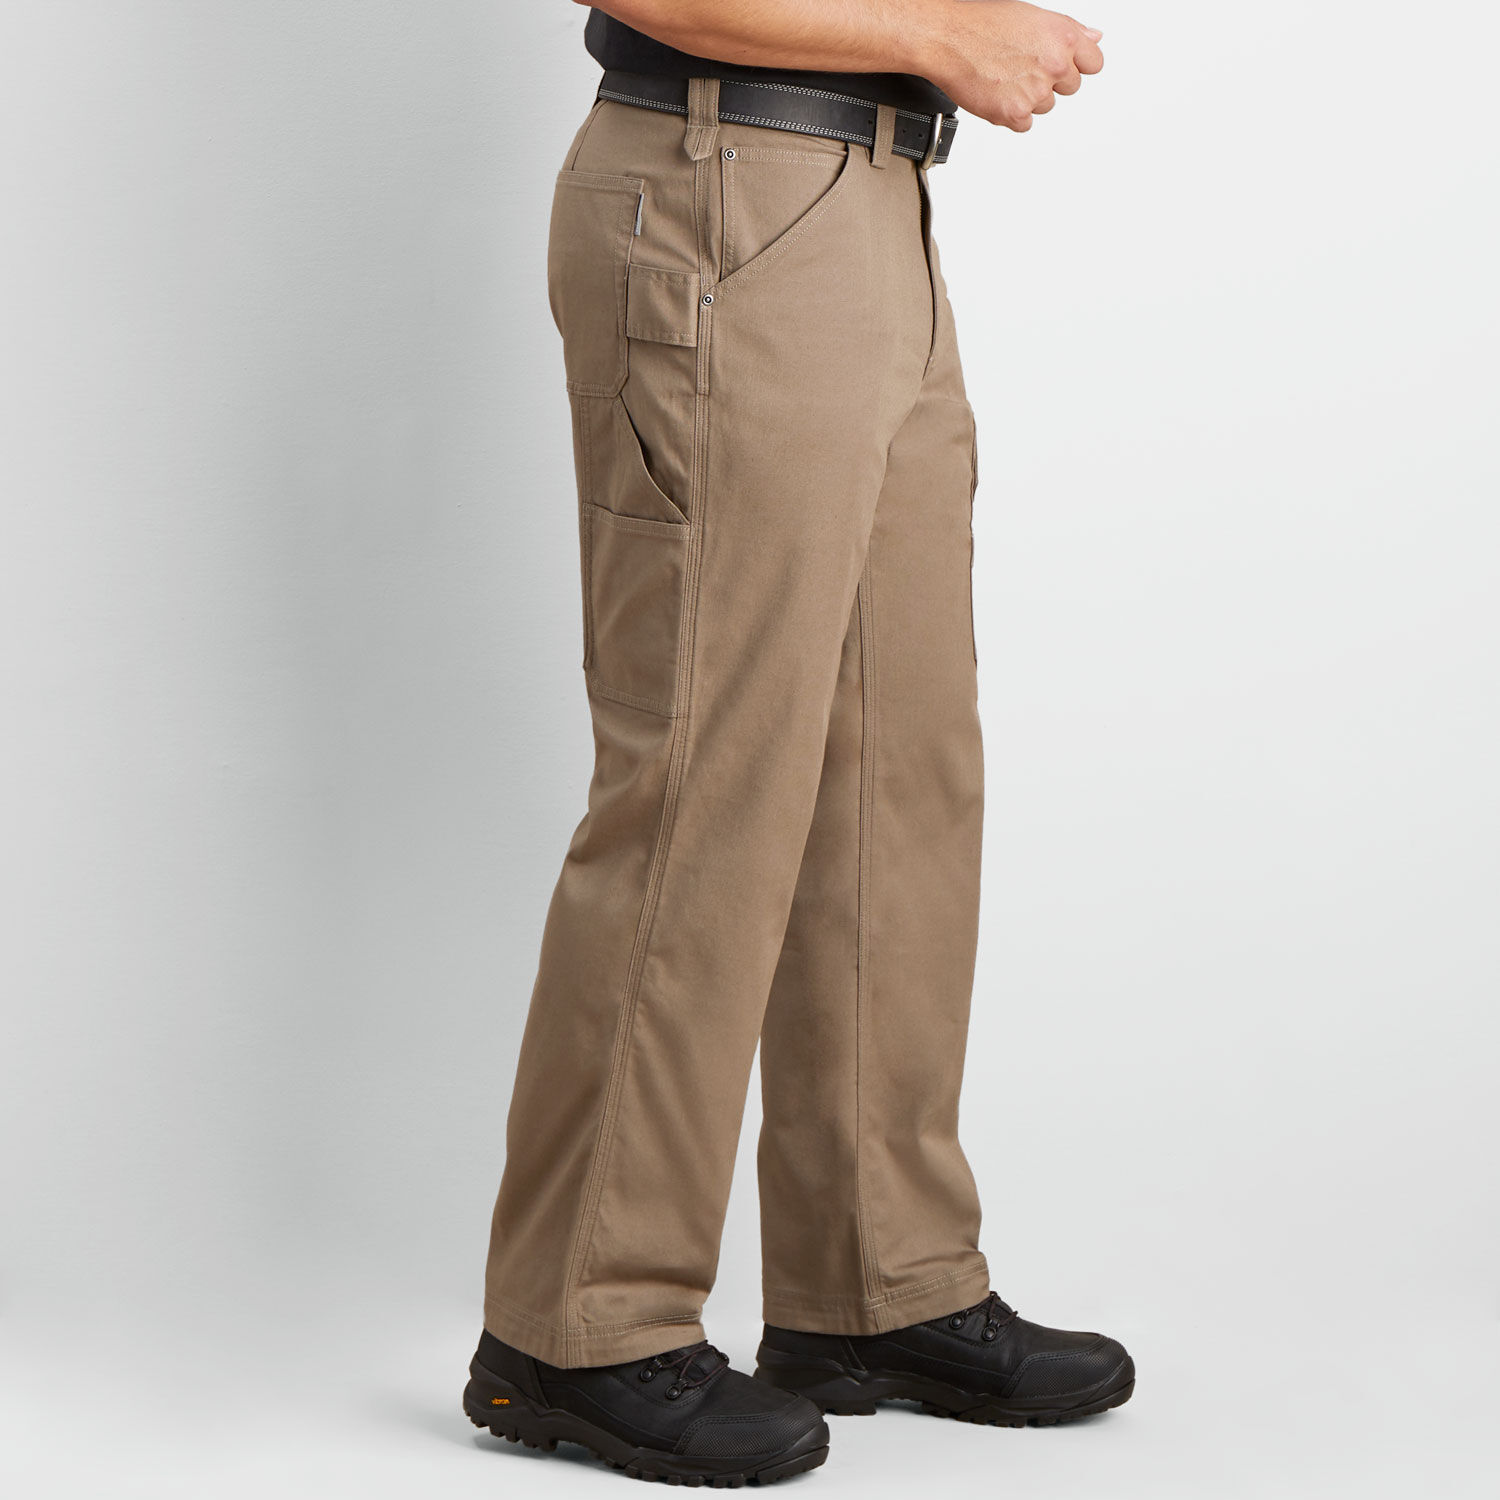 Aggregate 88+ duluth trading breathable pants super hot